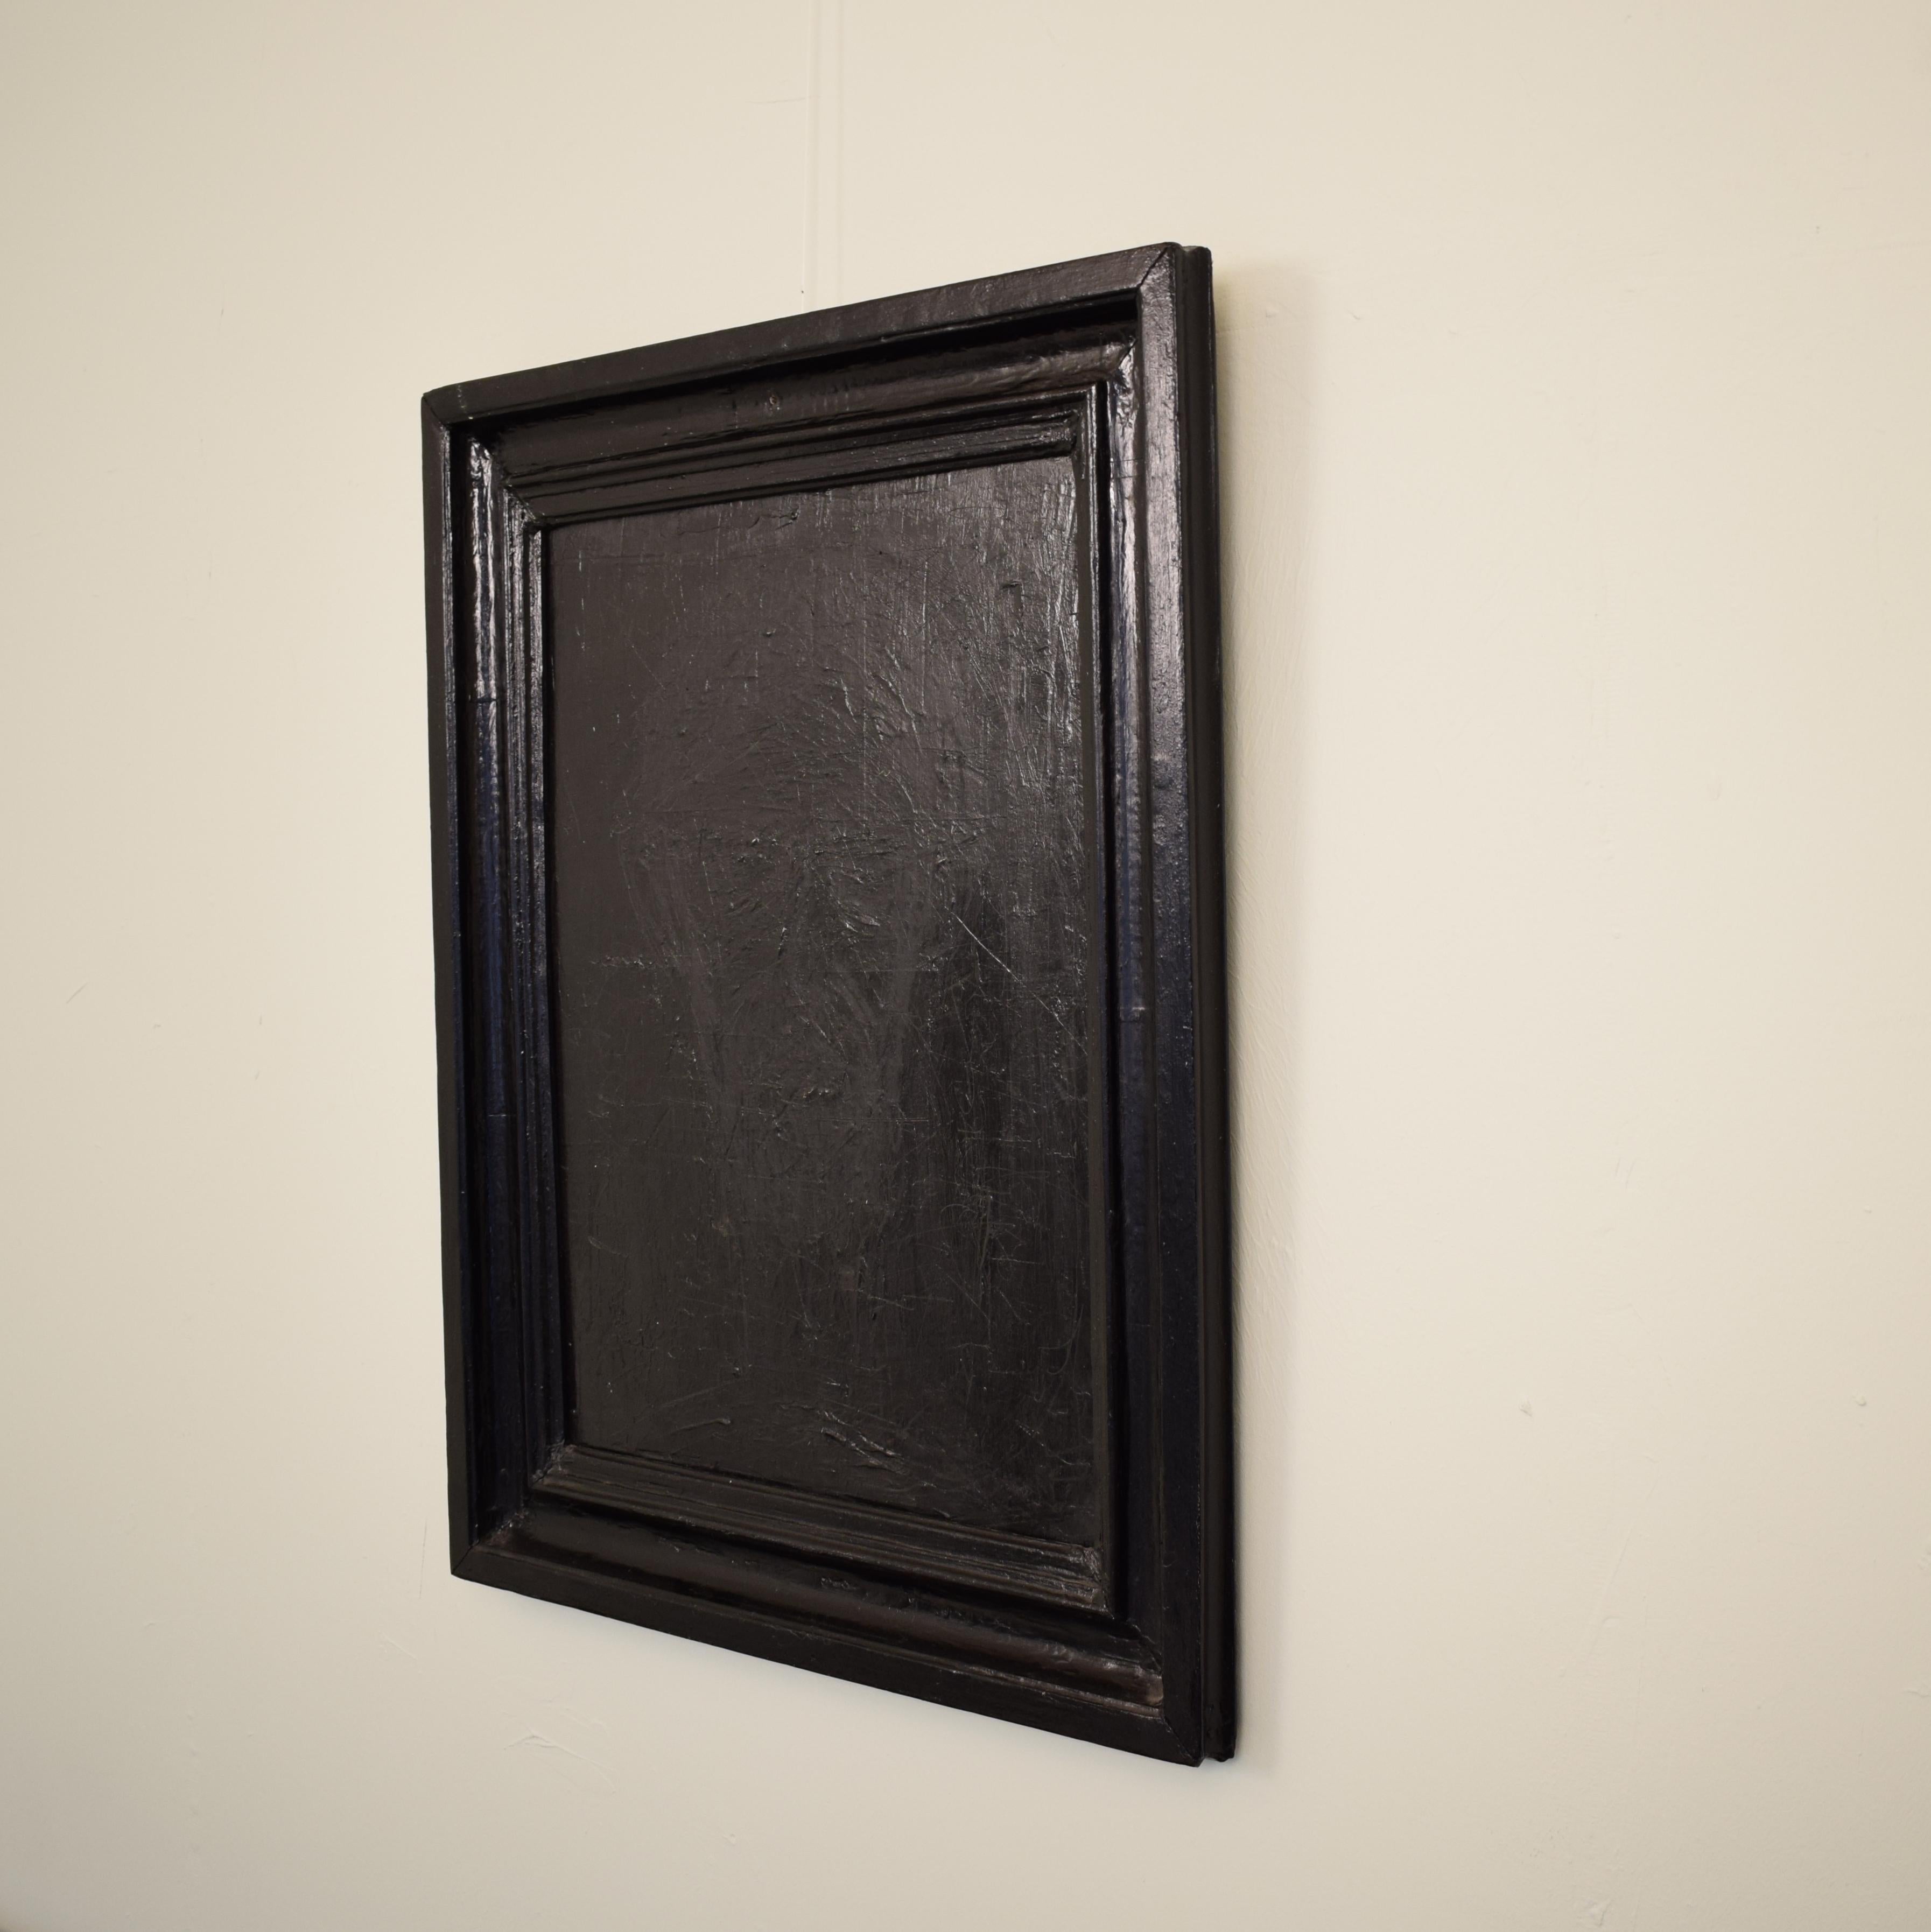 This black painting has heavily textured acrylics on canvas.
The artist created the piece using multiple techniques like palet knife, brush and chalk.
It is in an old 19th century picture frame.
The painting would complement a modern interior design